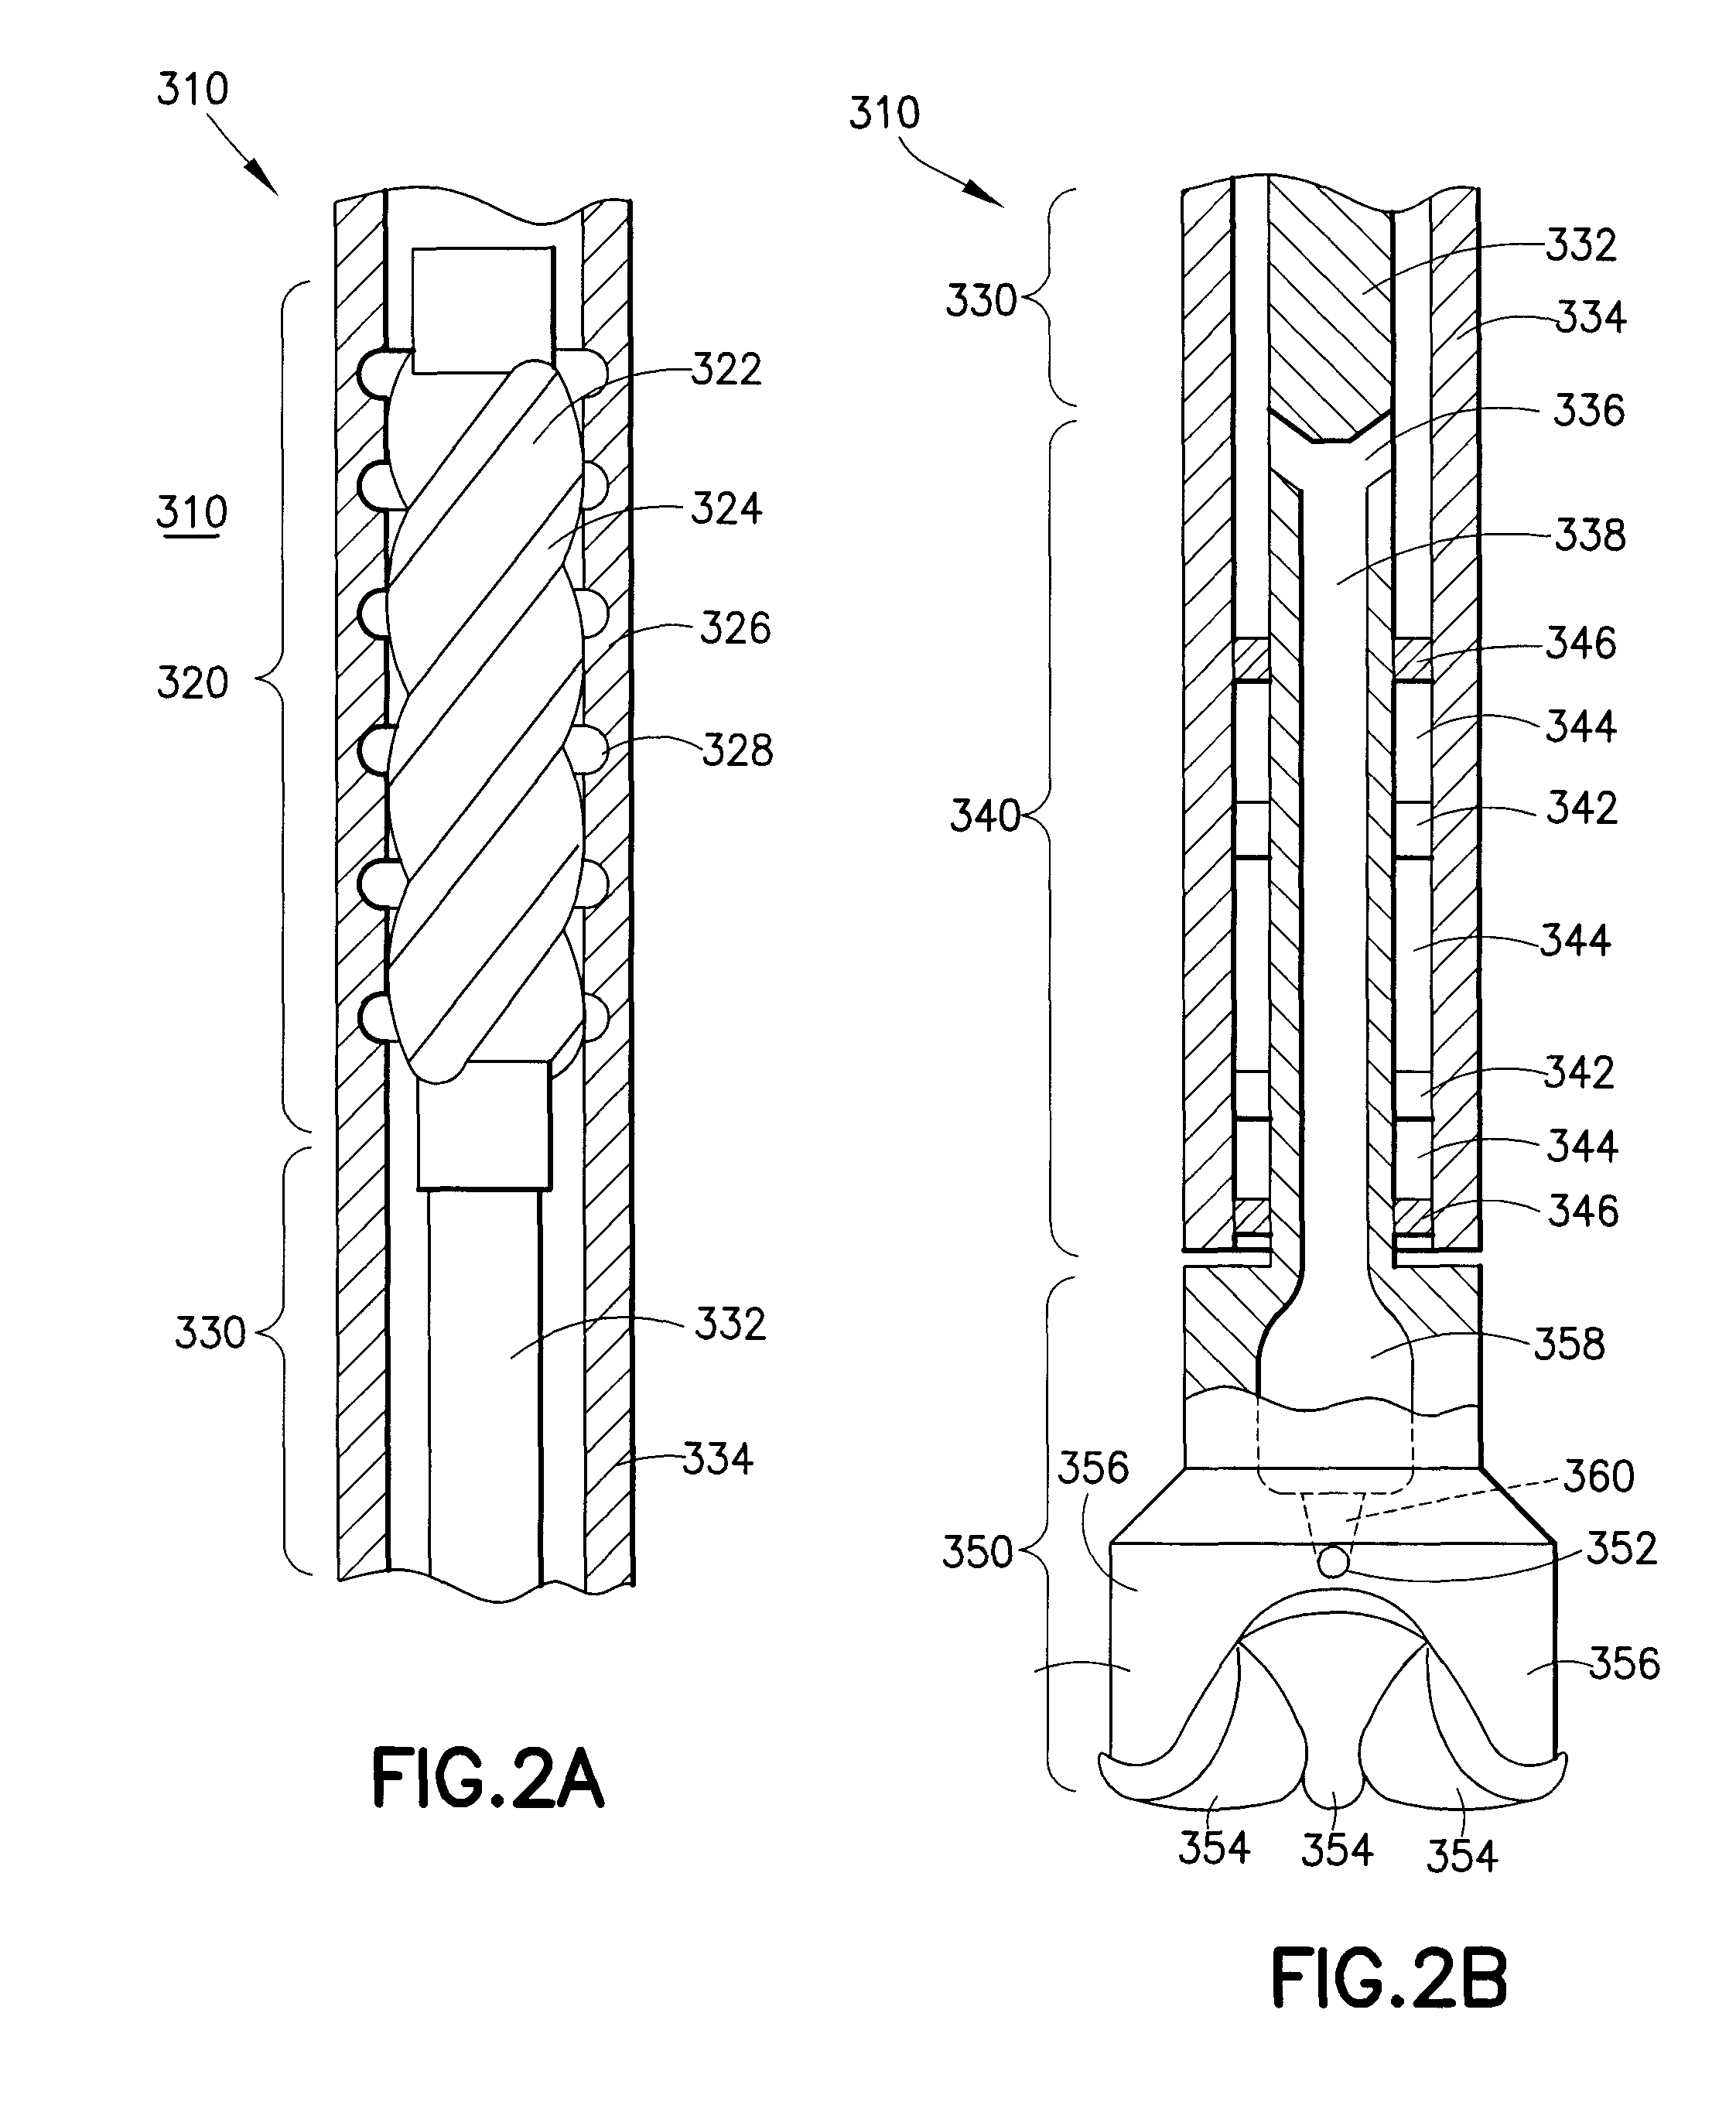 Erosion resistant surface and method of making erosion resistant surfaces